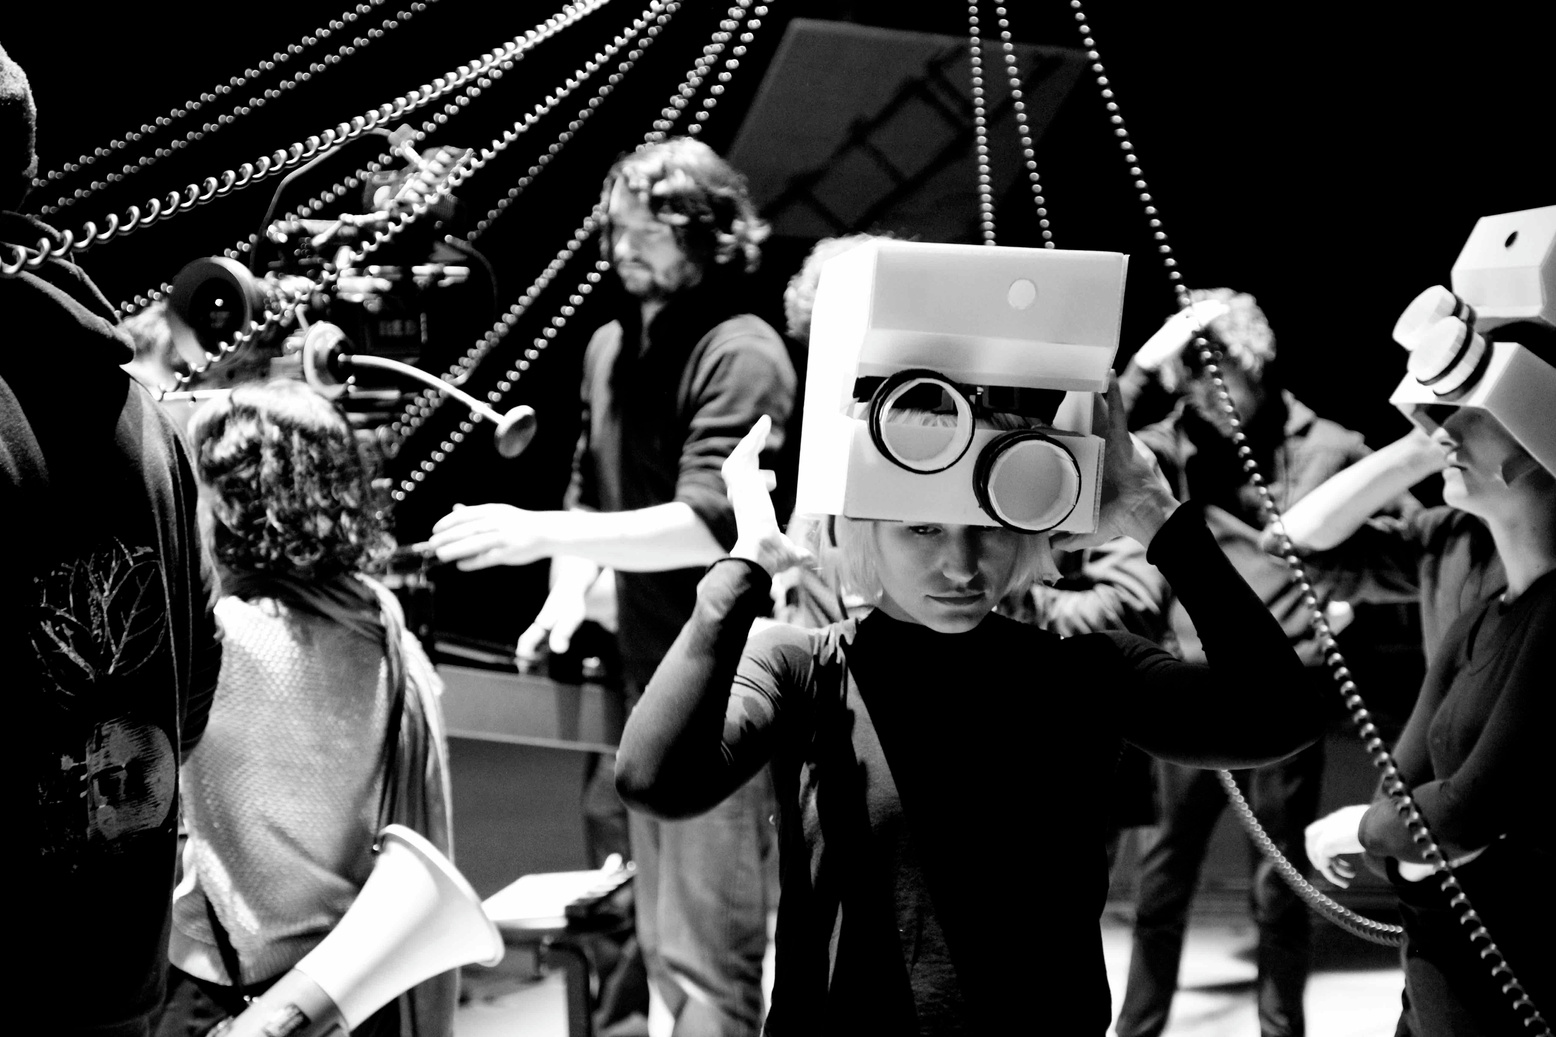 a black and white photo of a group of people and one person in the foreground wearing a cube like helmet